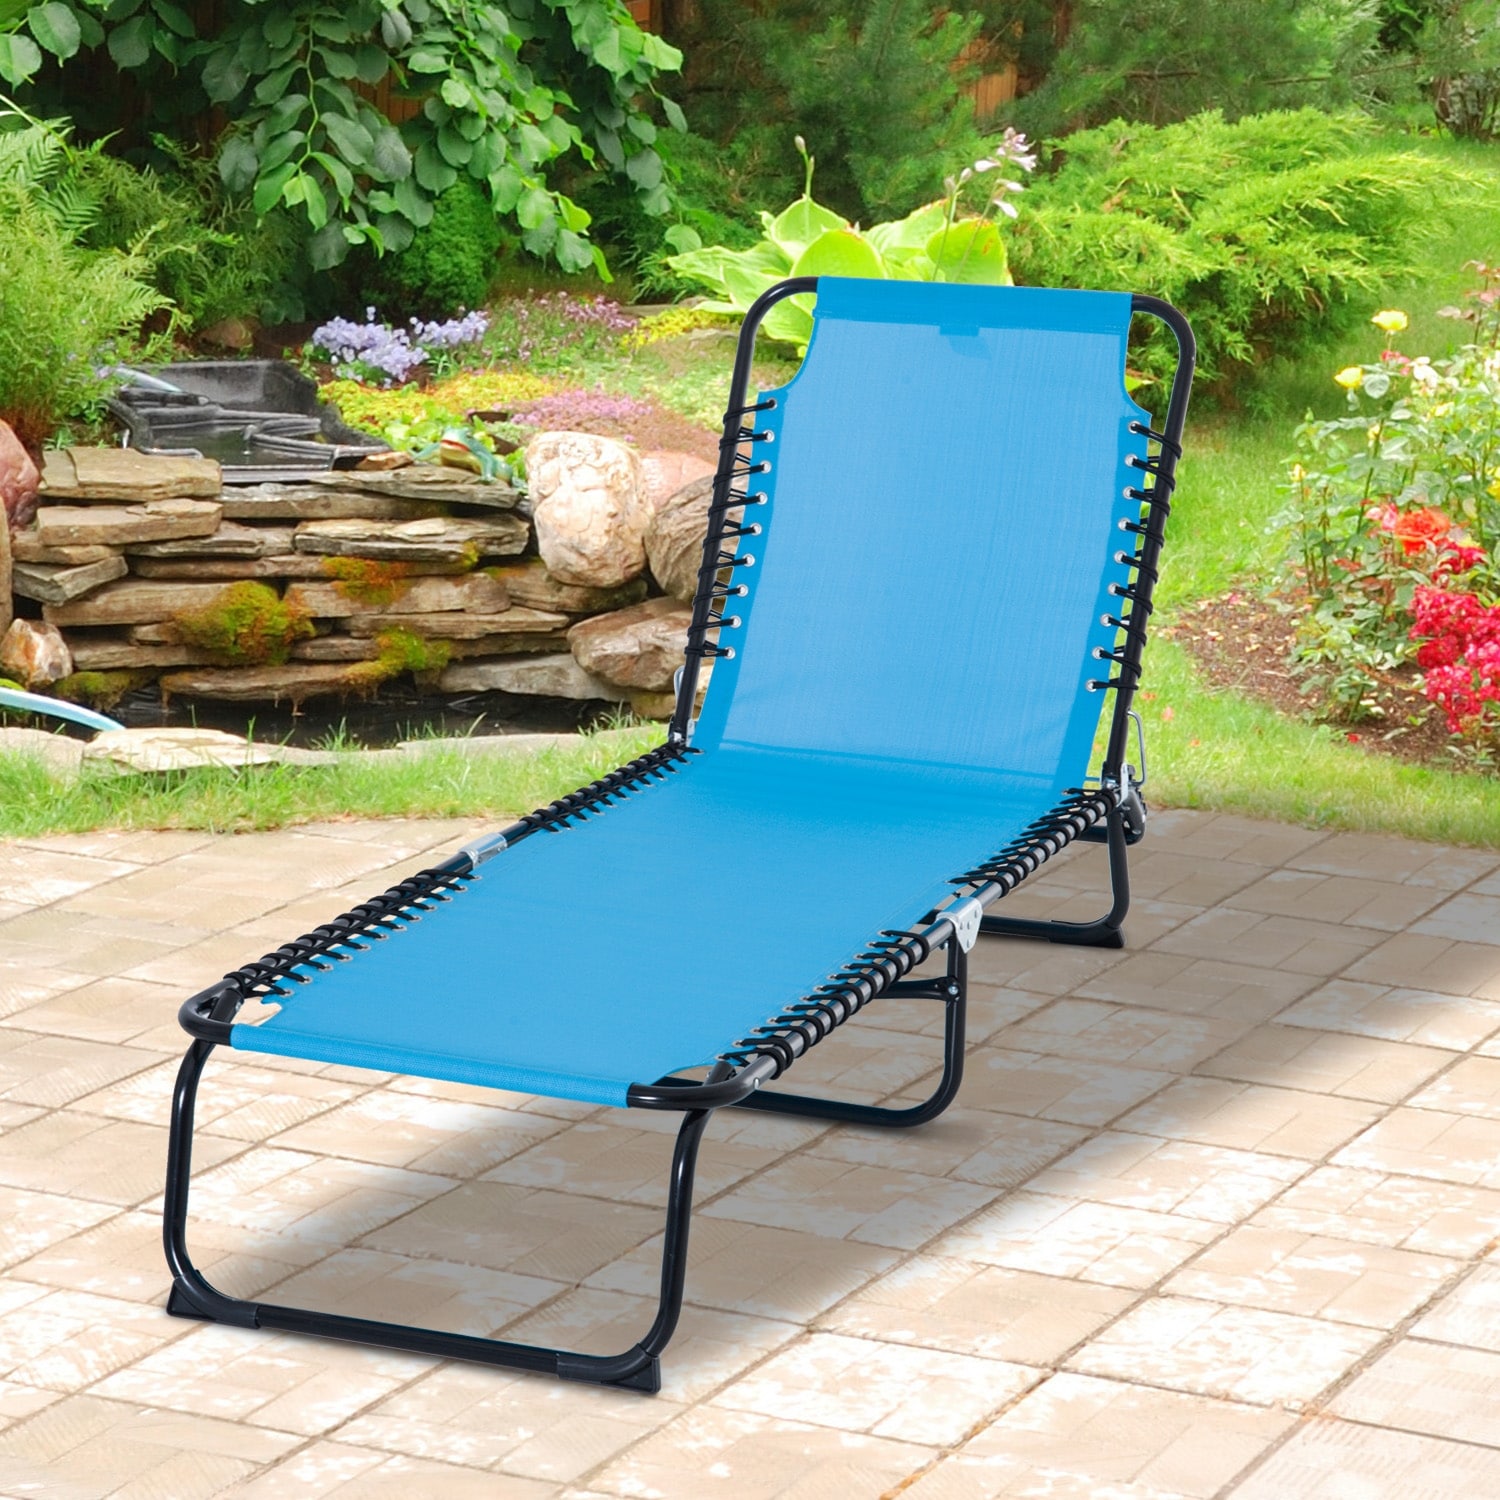 Outsunny Folding Chaise Lounge Chair Portable Lightweight Reclining Garden With 4-position Adjustable Backrest  Light Blue